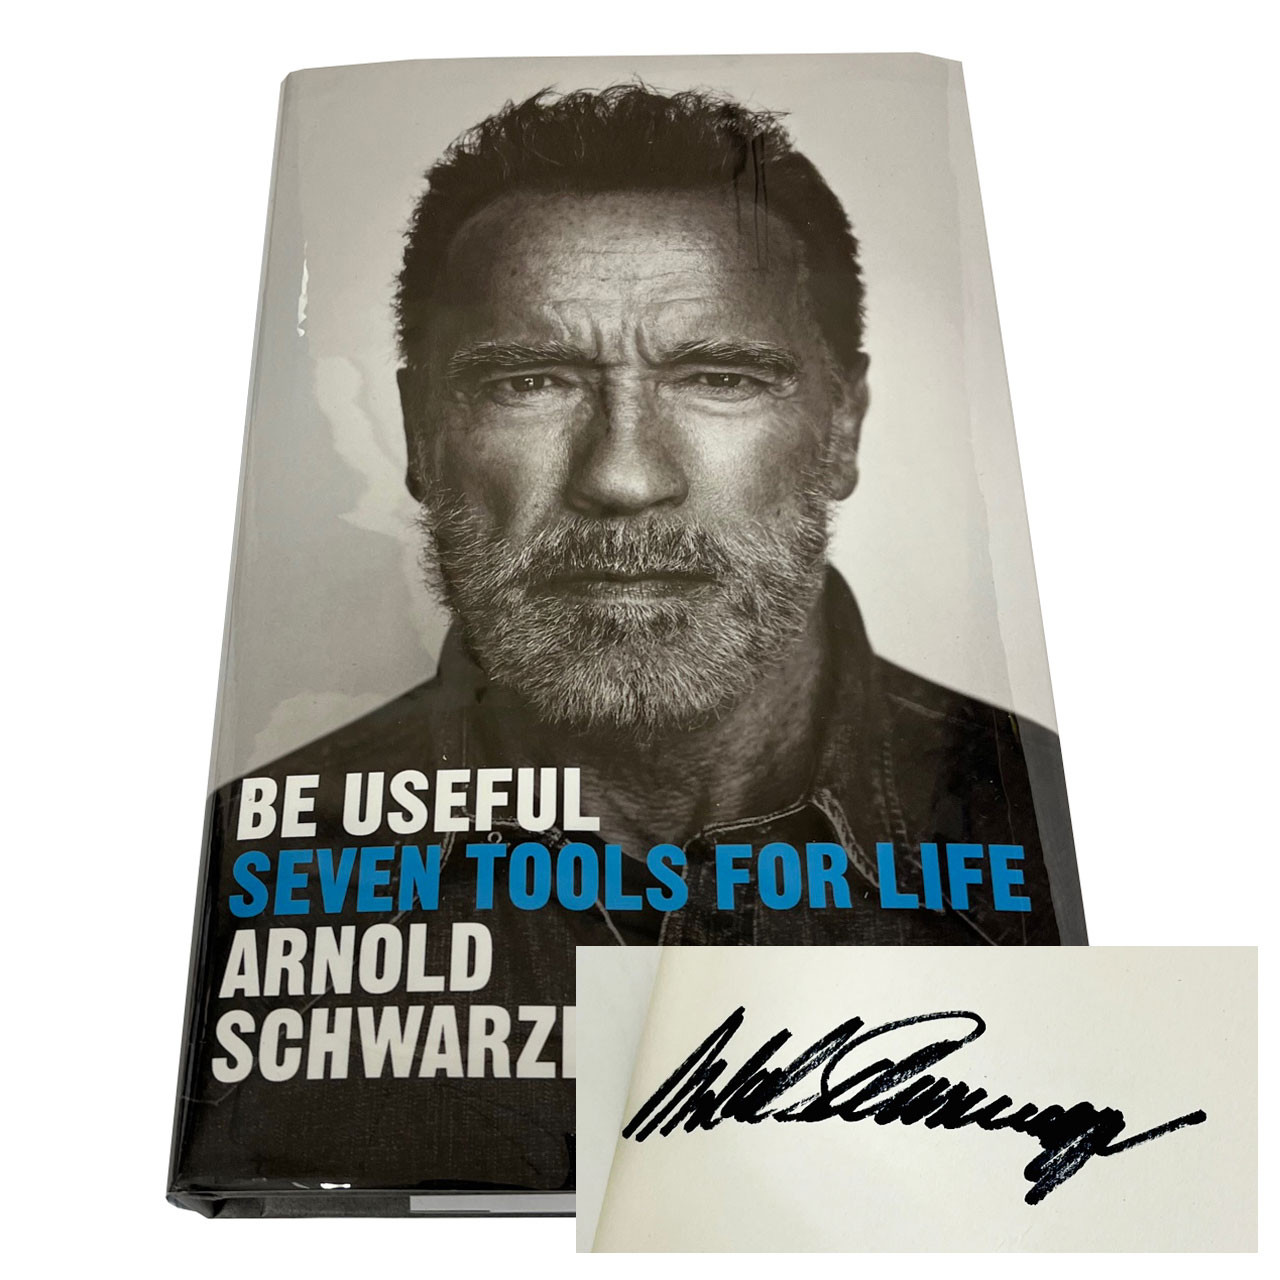 Arnold Schwarzenegger "Be Useful" Signed First Edition w/COA [Very Fine]